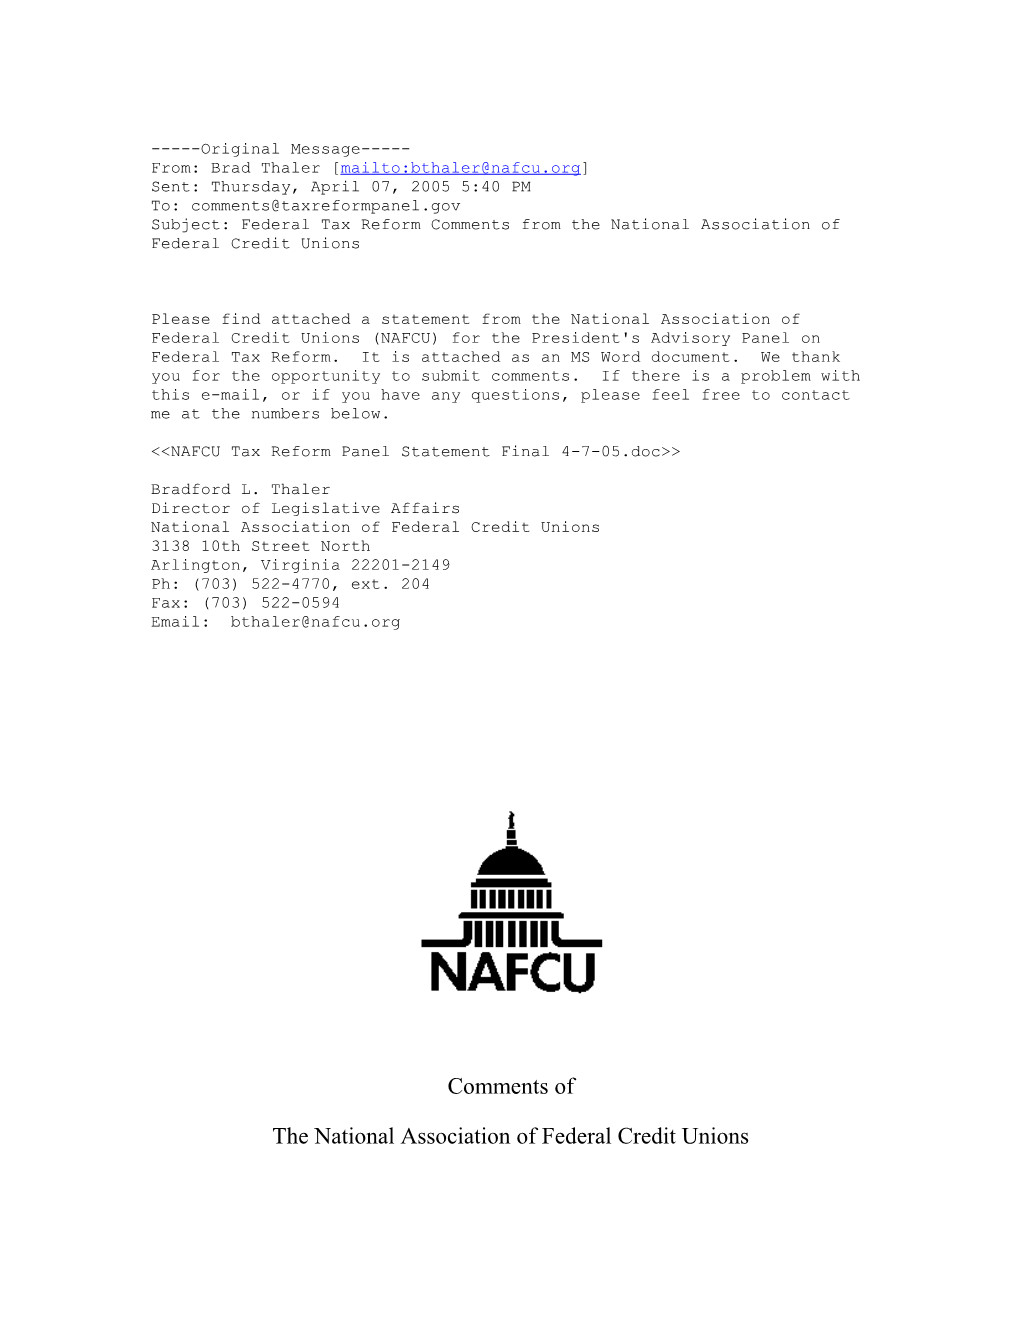 The National Association of Federal Credit Unions (NAFCU), the Only National Trade Association